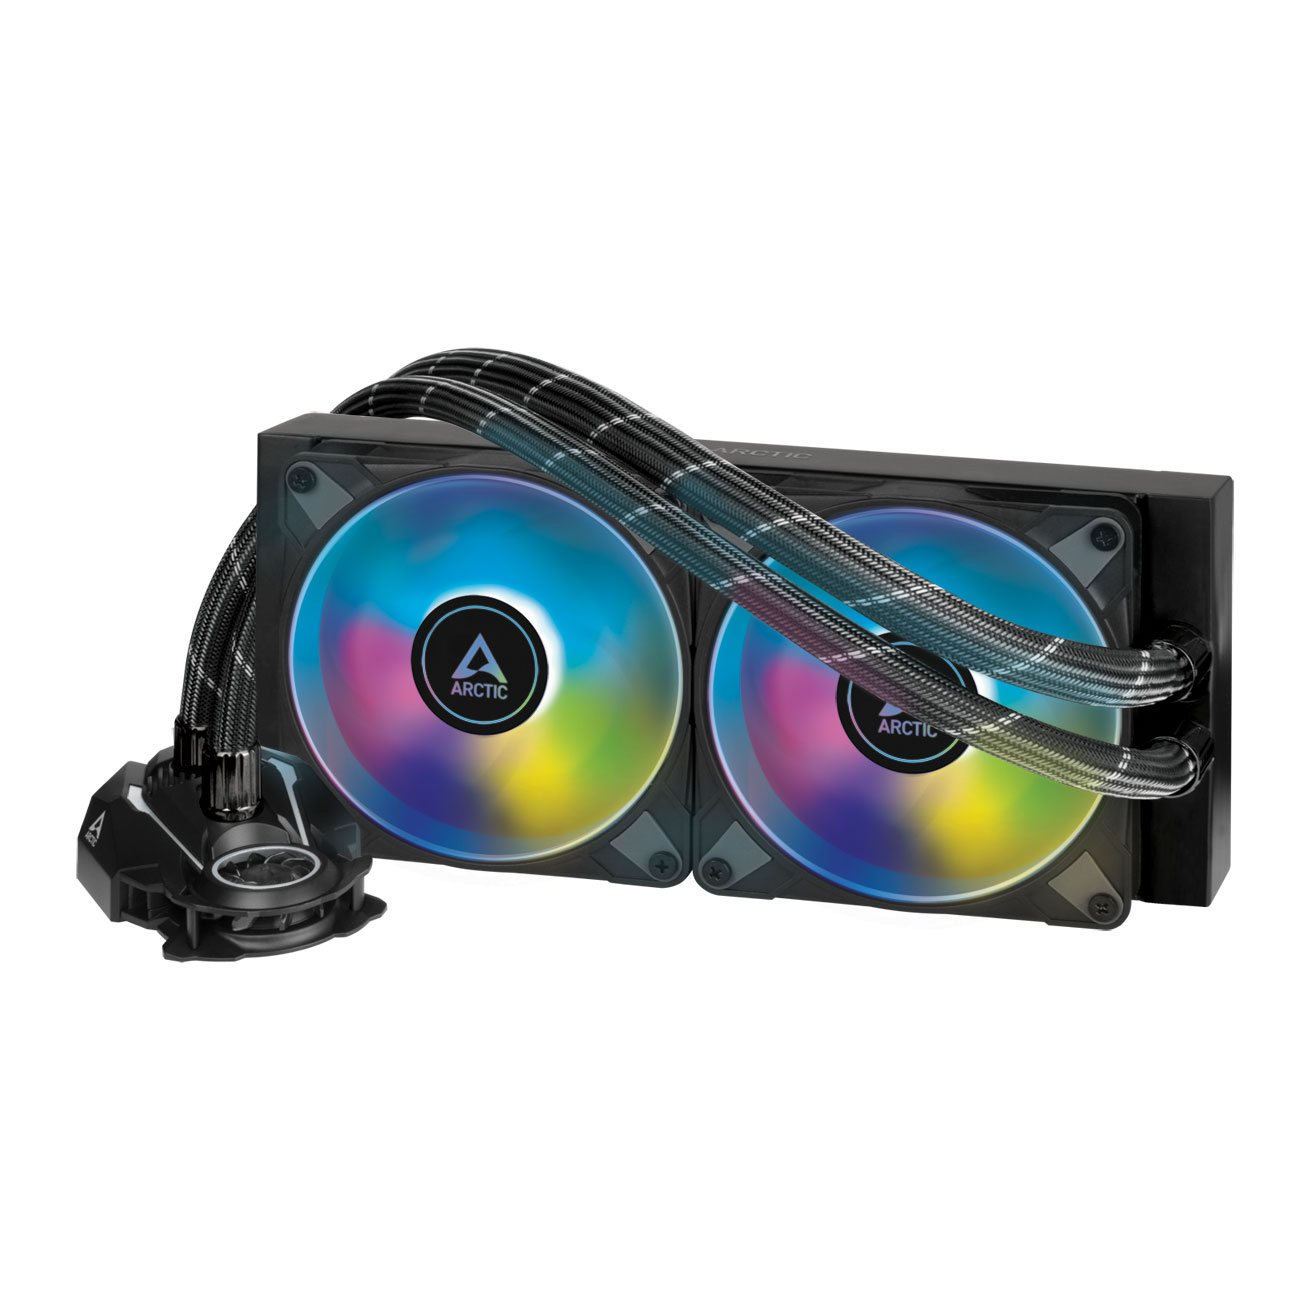 Arctic Liquid Freezer II - 240 A-RGB Black W/ Controller : All-in-One CPU Water Cooler with 240mm ra - Arctic 2.35.64.03.007